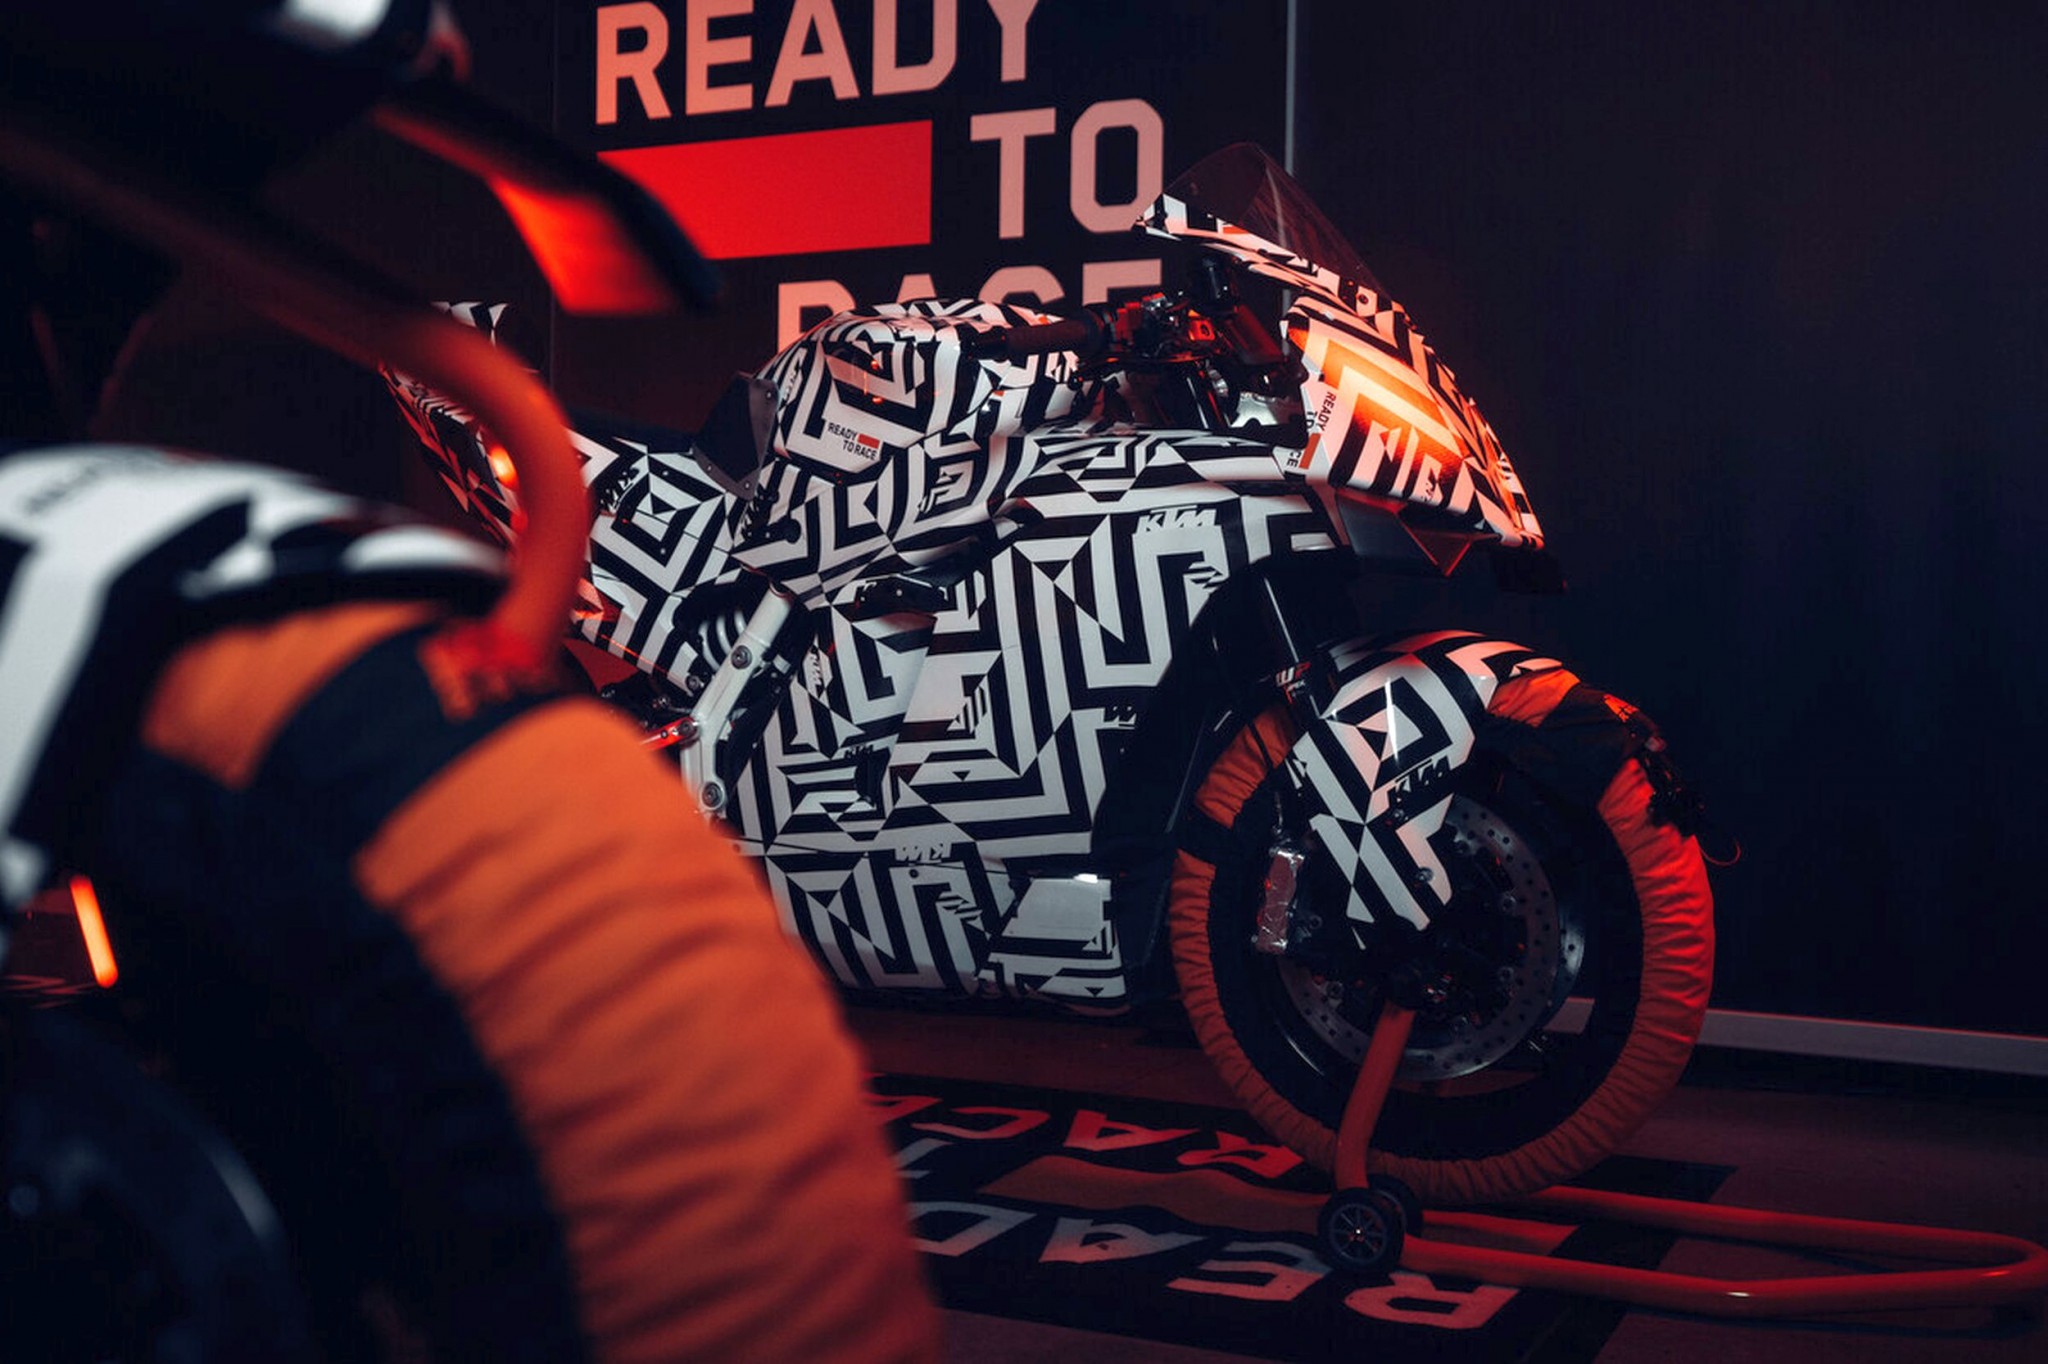 KTM 990 RC R - finally the thoroughbred sports bike for the road! - Image 41